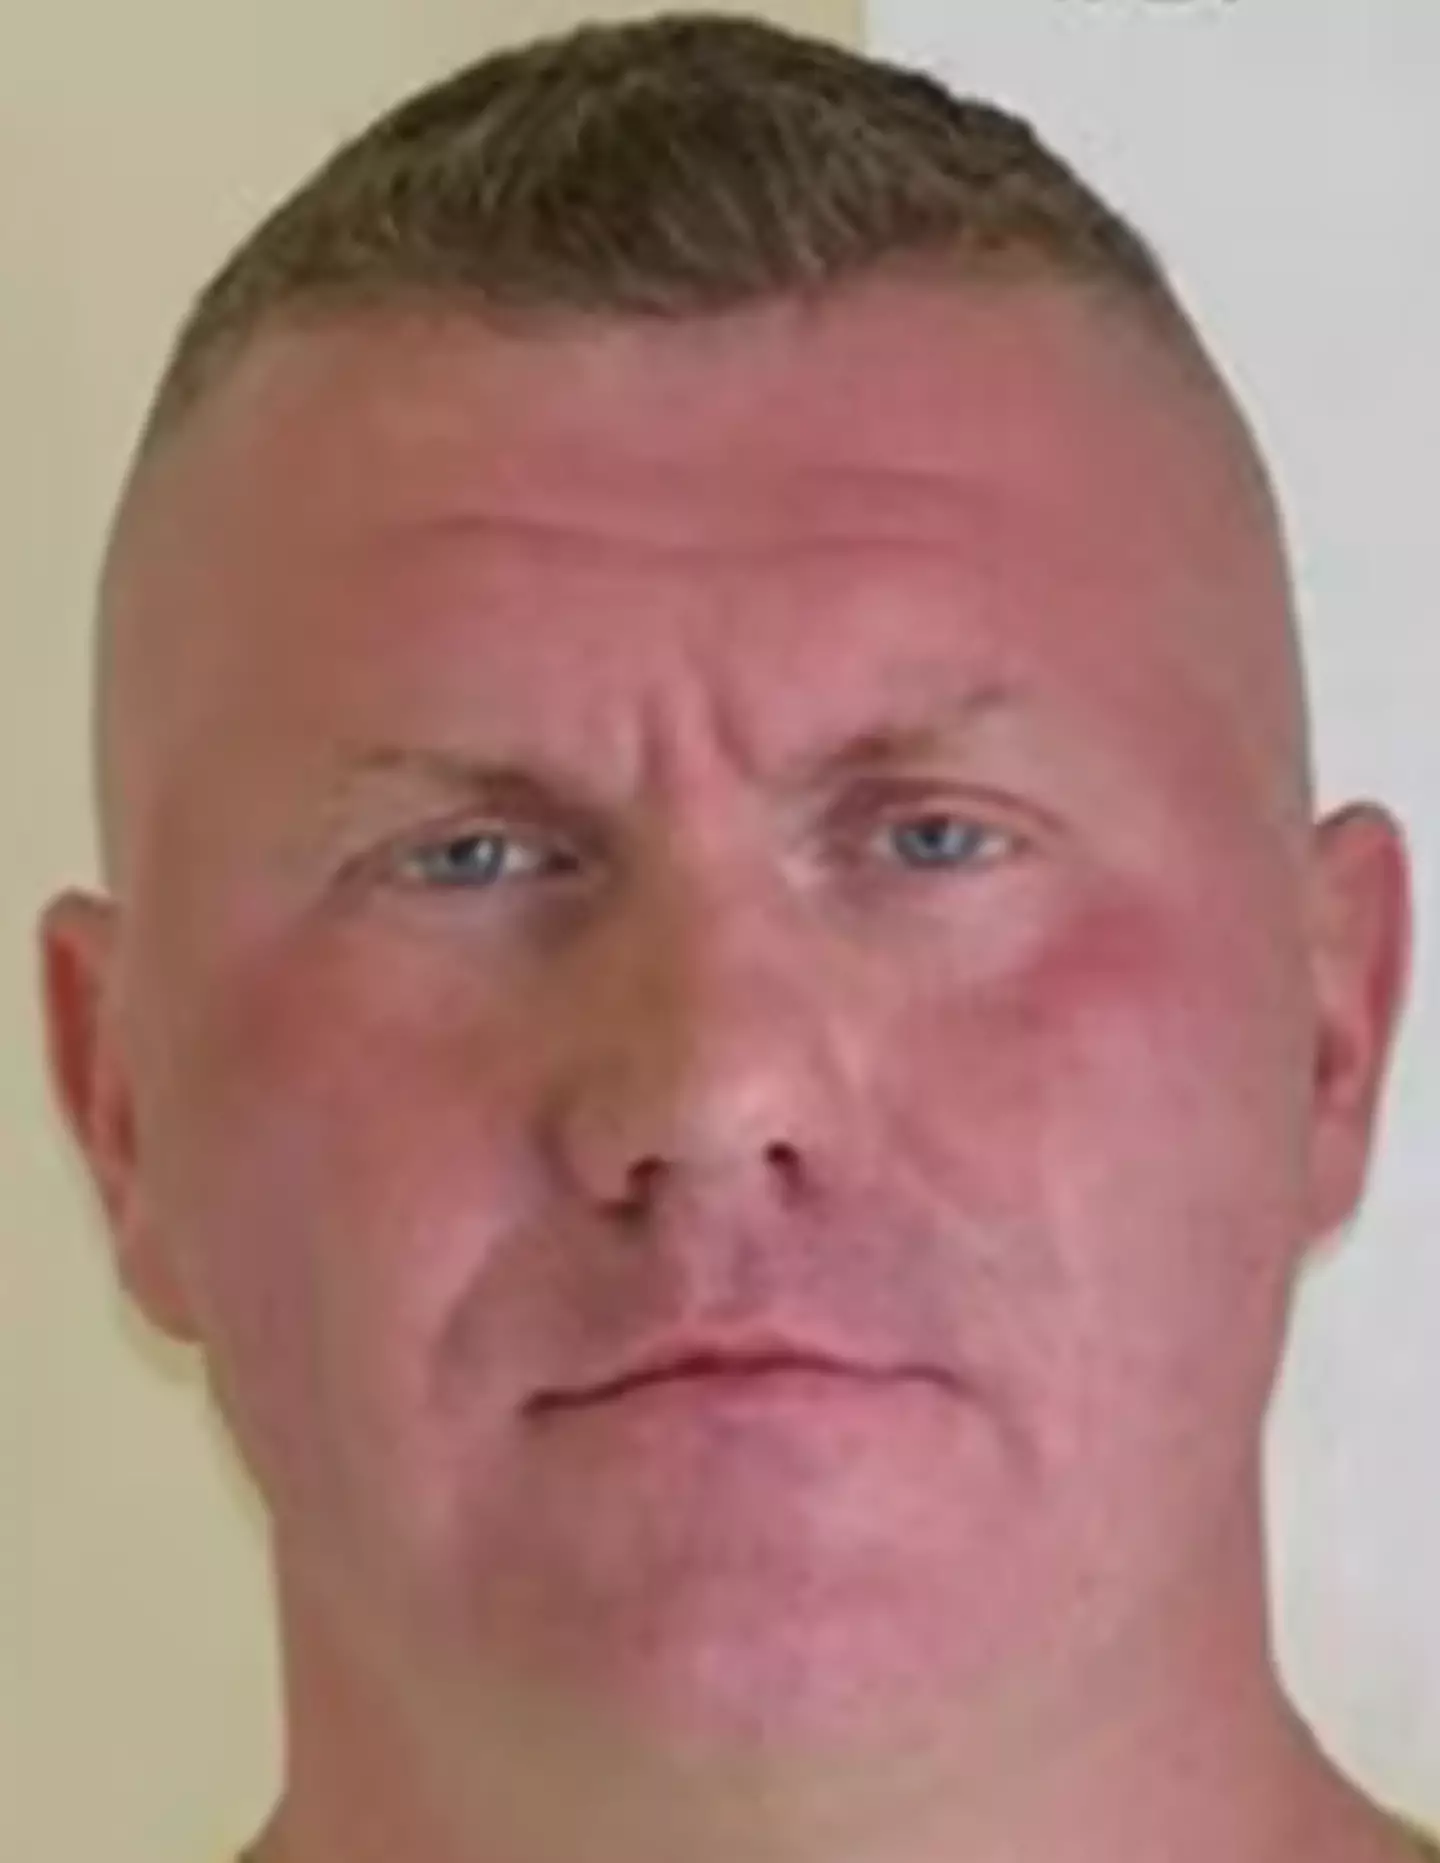 Raoul Moat went on the murderous rampage in 2010.